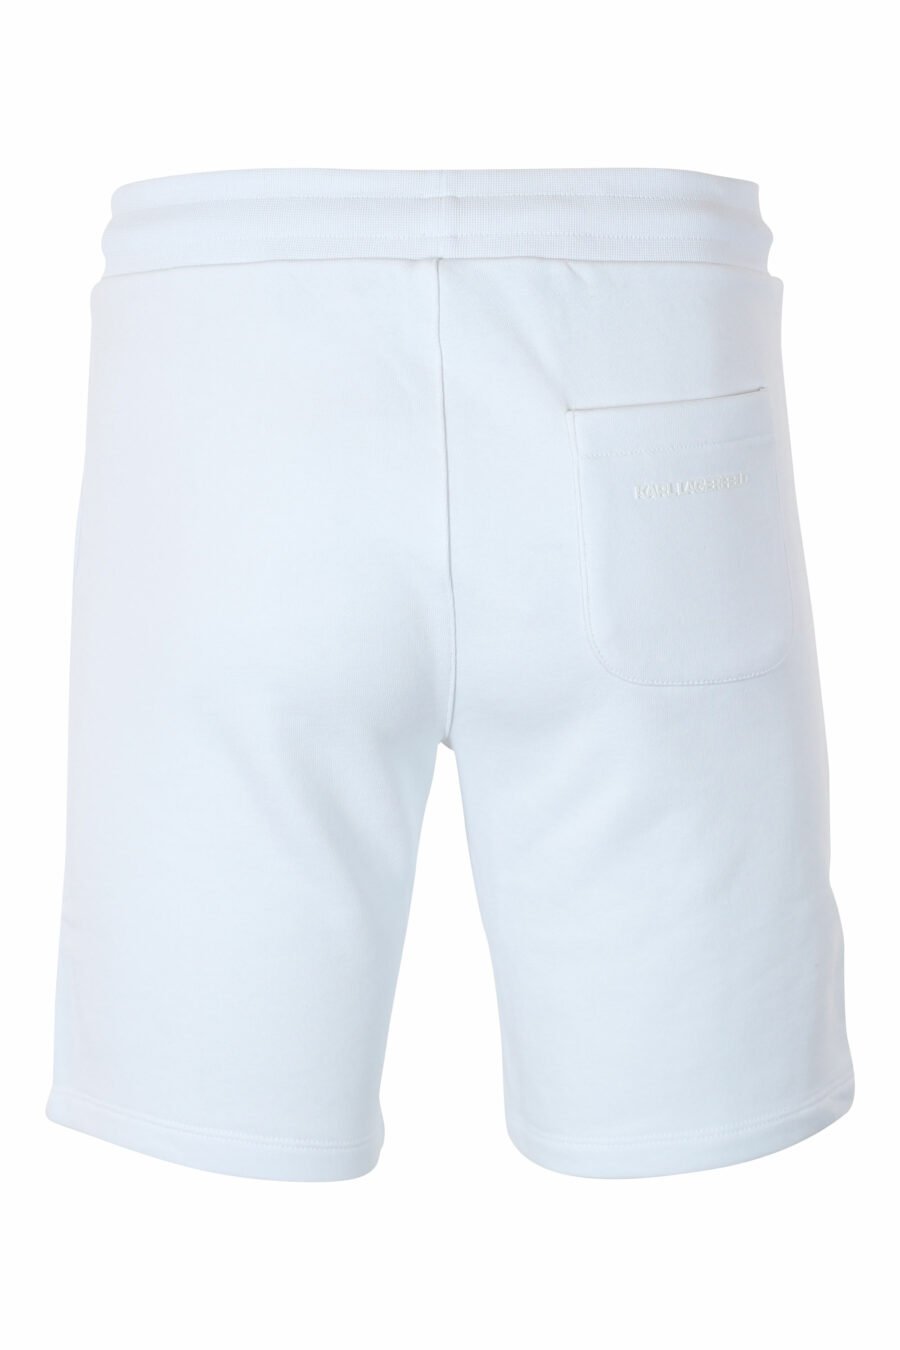 Tracksuit bottoms white short with orange "rue st guillaume" minilogue - IMG 9561